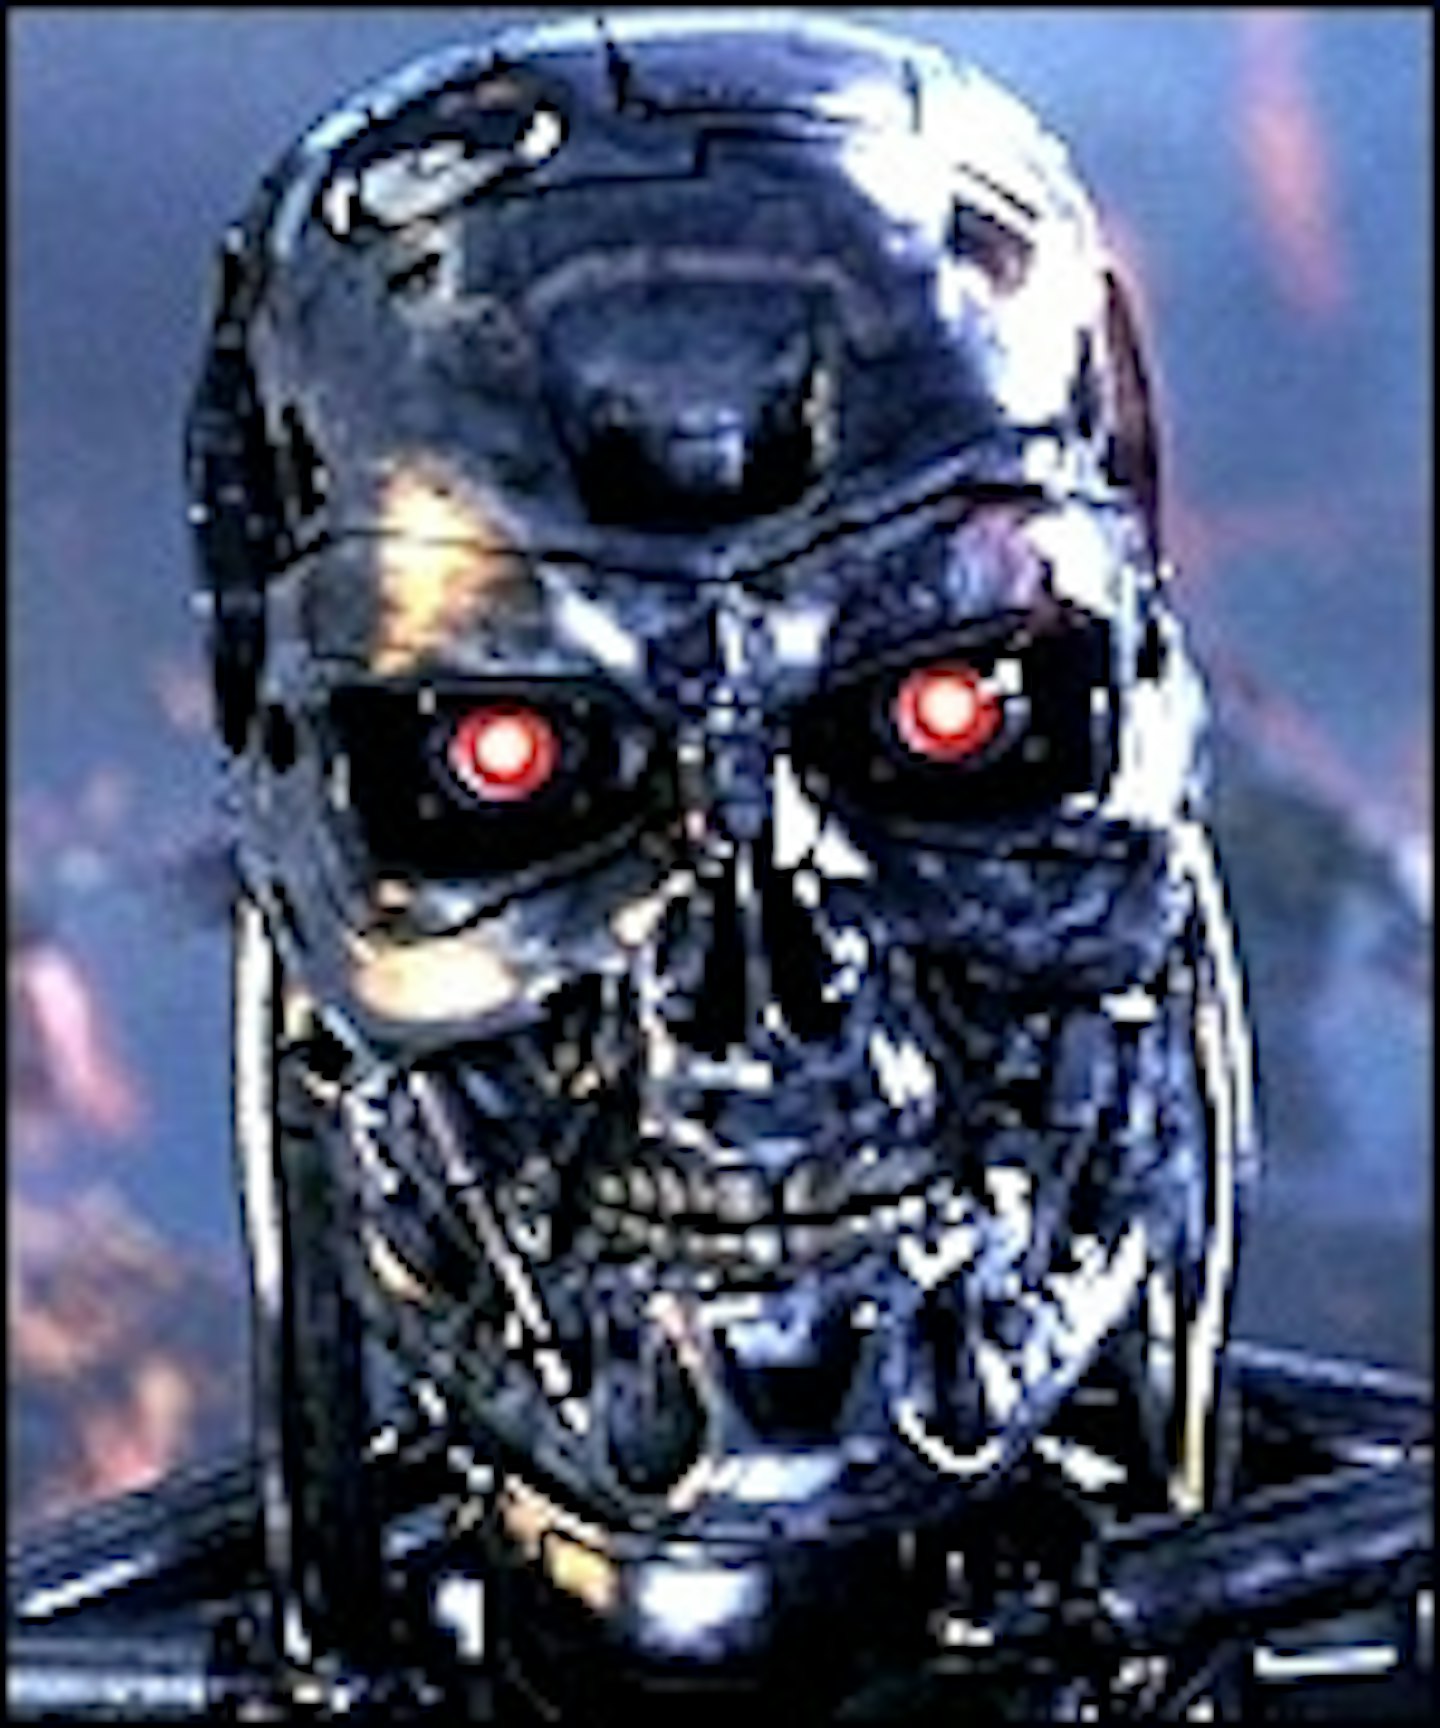 New Terminator Film Title Confirmed As 'Genisys'